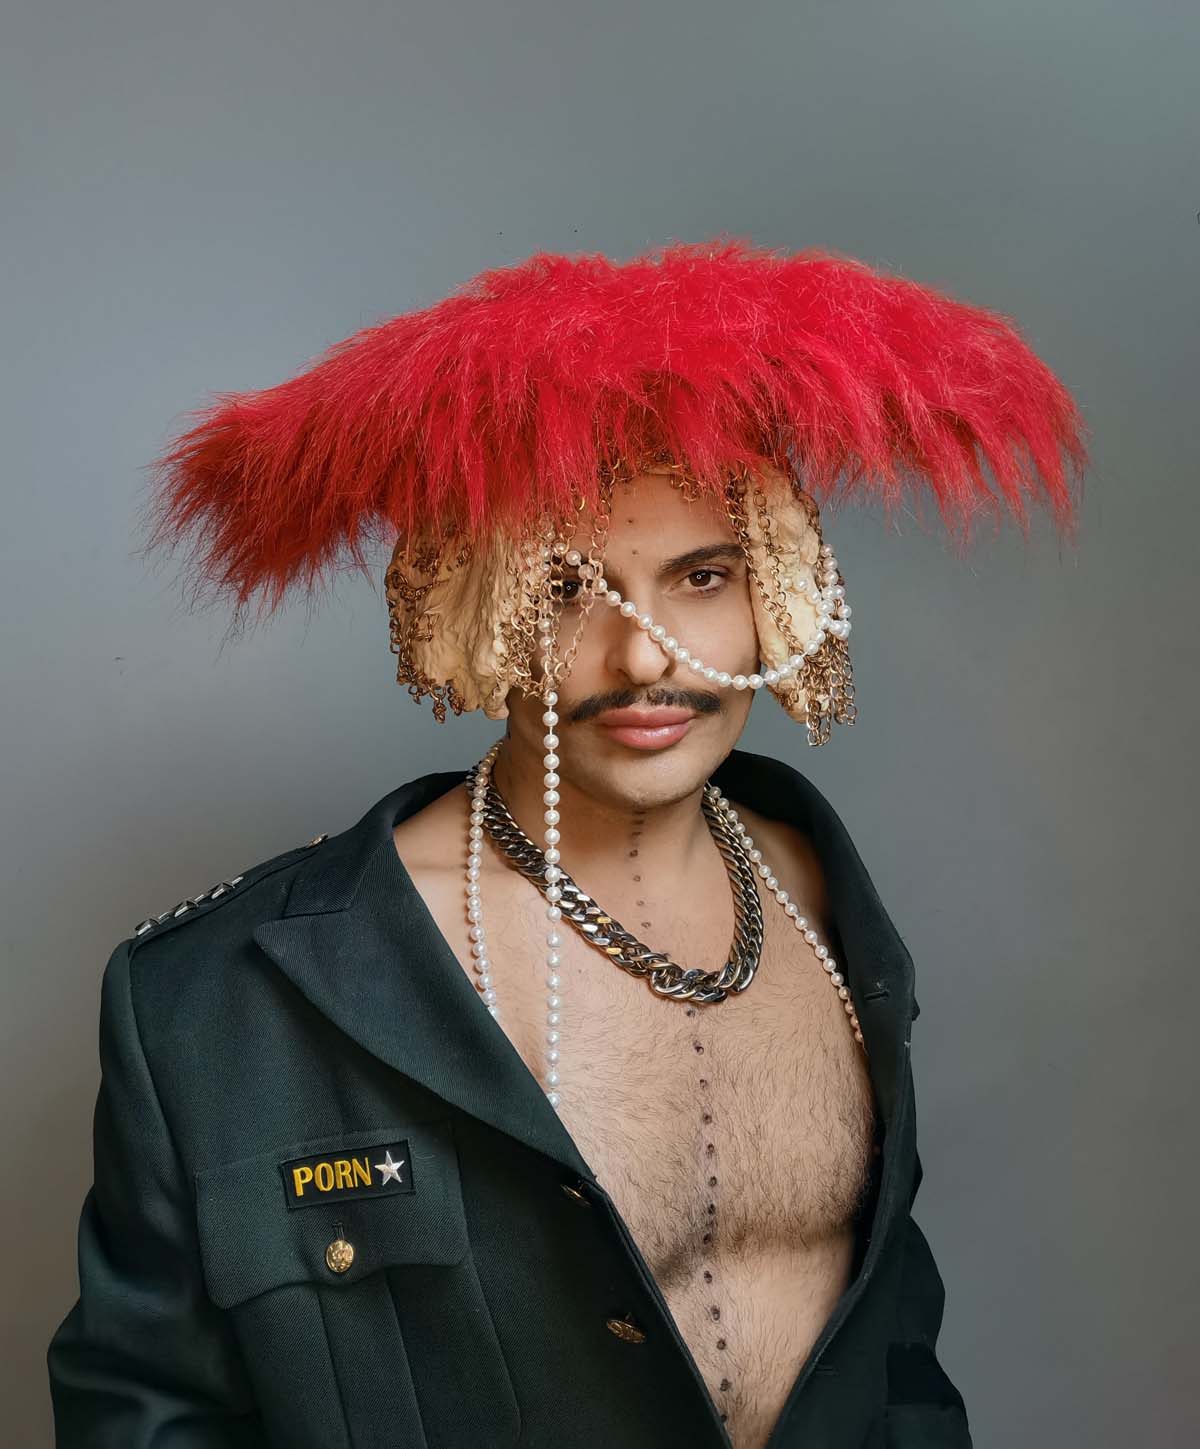 White male can be seen up to the waist against a grey background. Ivo Dimchev is wearing a dark grey uniform jacket with "PORN" written on the breast pocket. His chest is bare. He wears a moustache, a heavy link chain around his neck and a mushroom-shaped headdress made of tulle, gold chains and a wide, bright red top made of long plush hair. A white pearl necklace is draped around his head and shoulders.